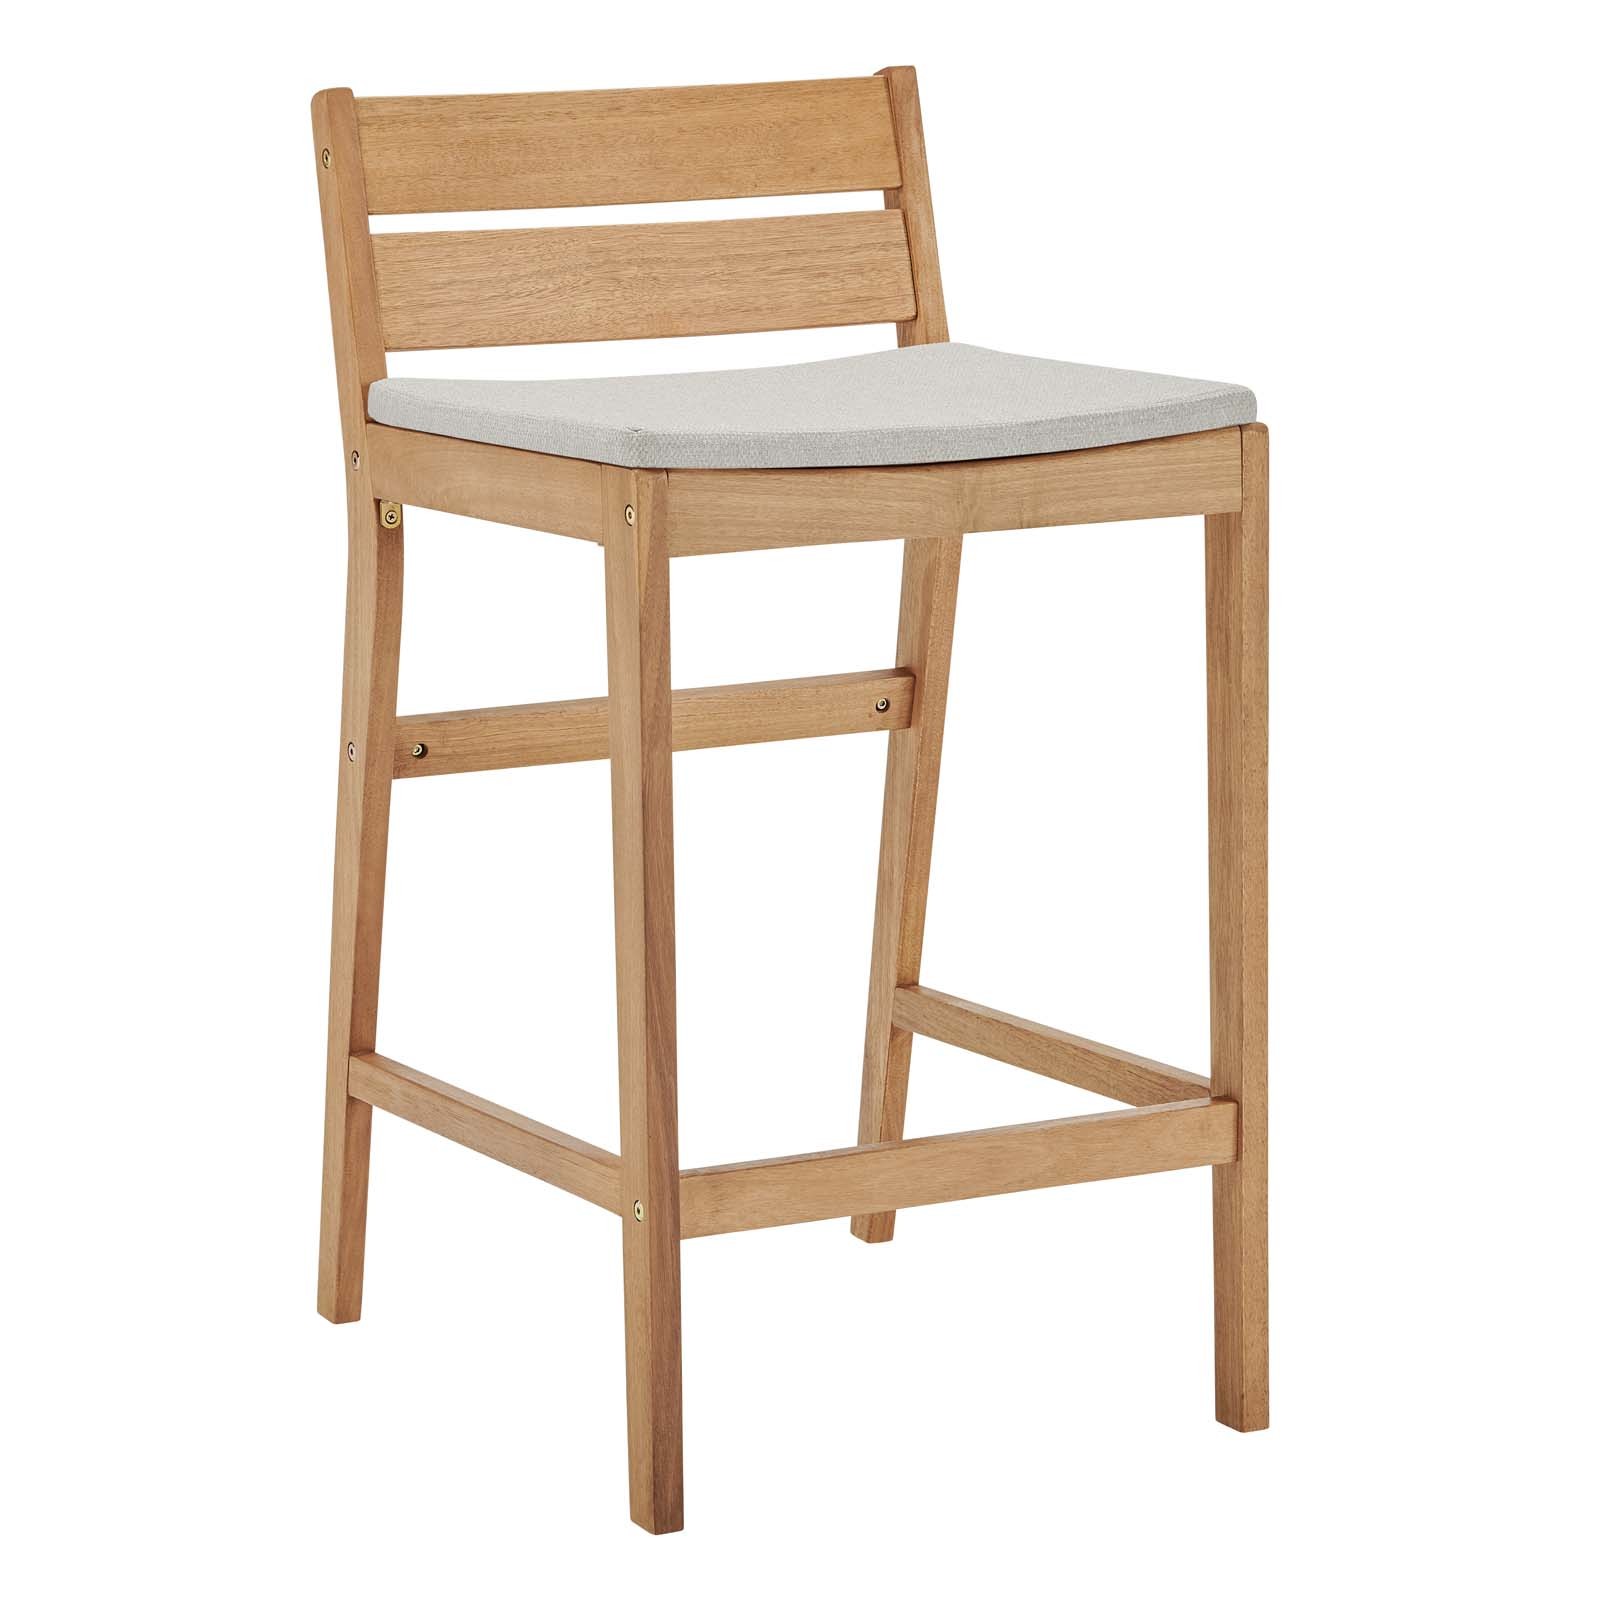 Riverlake Outdoor Patio Ash Wood Bar Stool in Natural Taupe